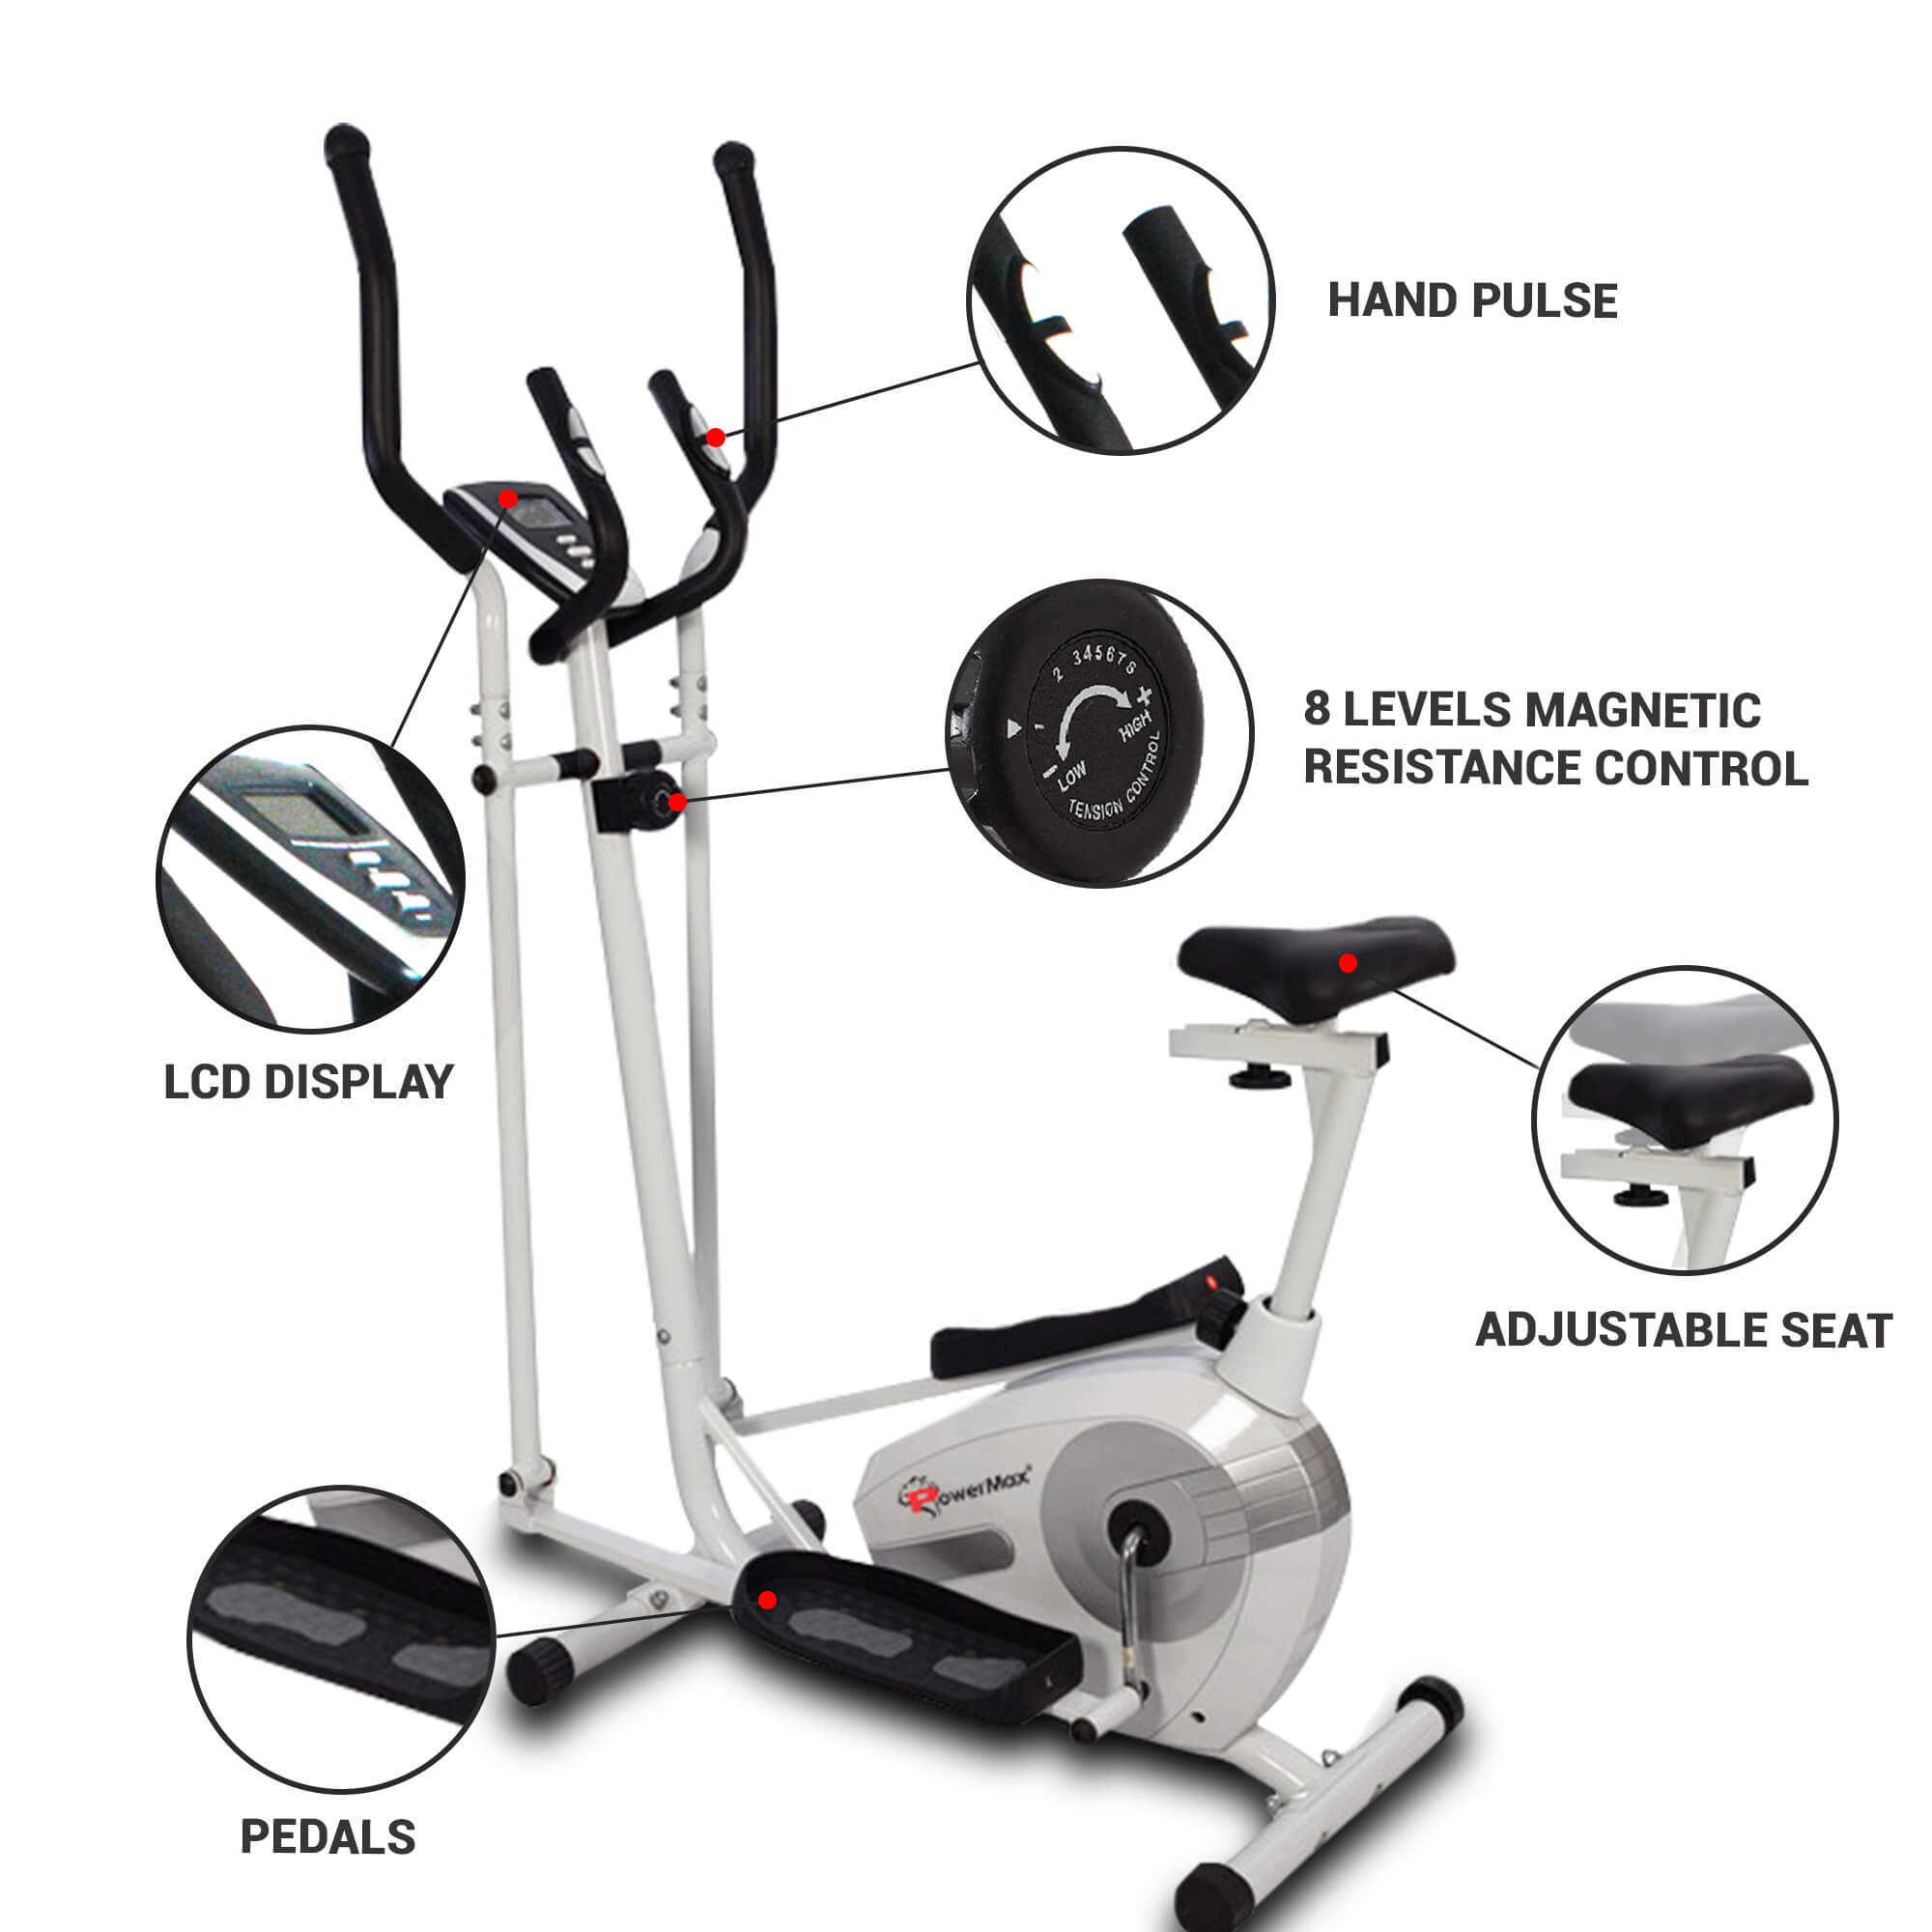 PowerMax Fitness EH-250S Elliptical Cross Trainer with Adjustable Seat